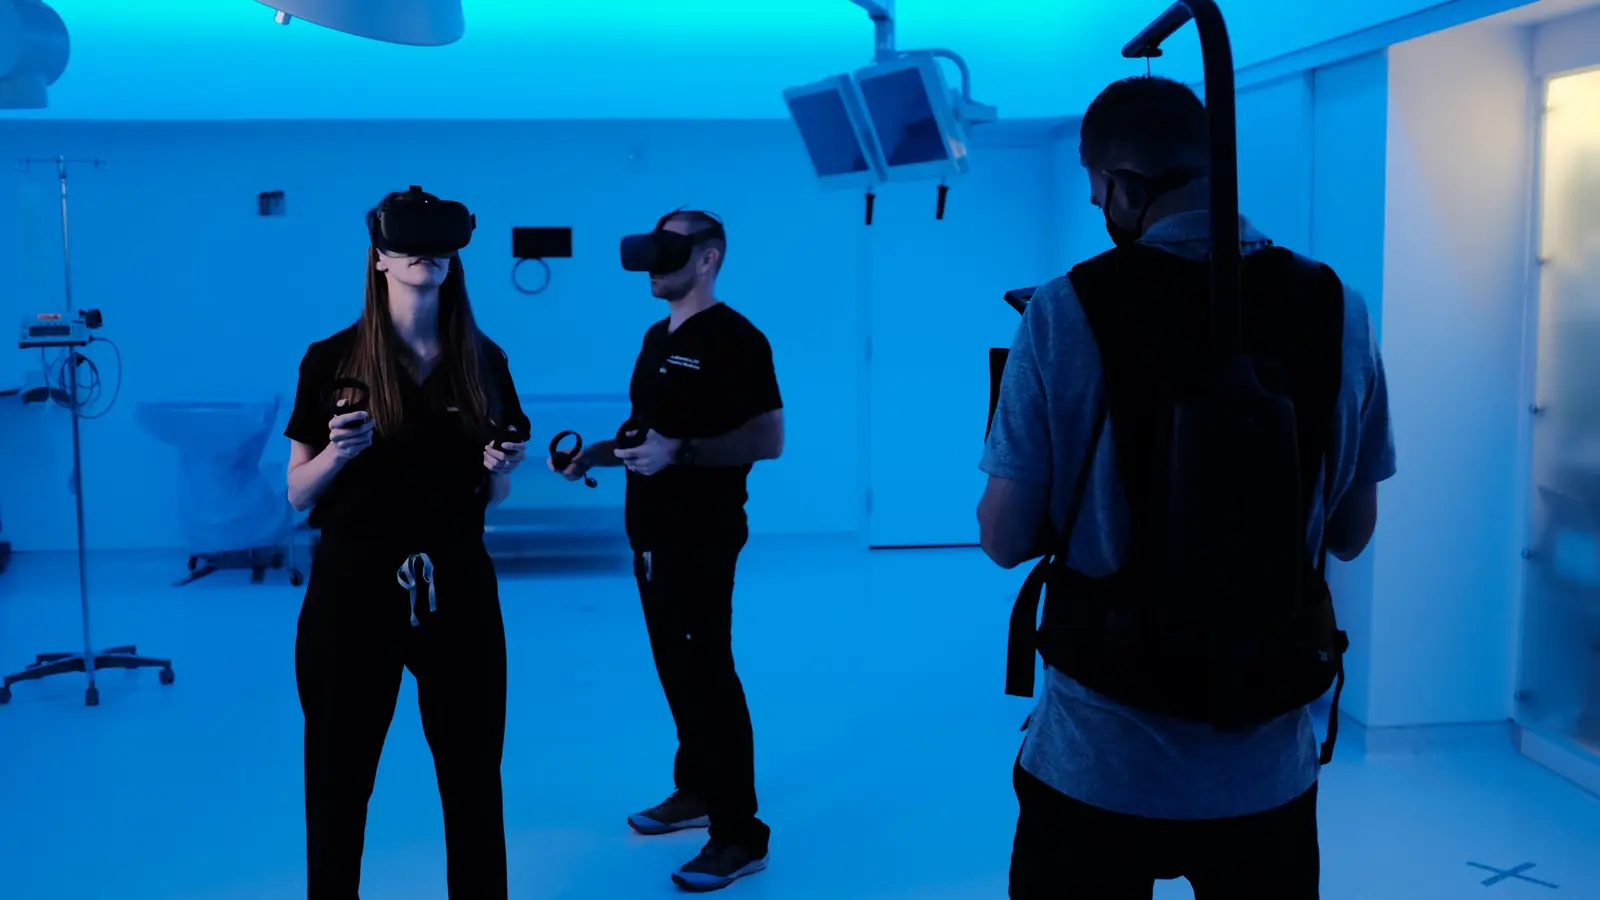 CAMLS Three people in a blue-lit room wear virtual reality headsets and hold controllers. They appear to be engaging with VR technology. One person has a strap across their back, possibly part of the VR equipment. The environment suggests a tech or training setup.